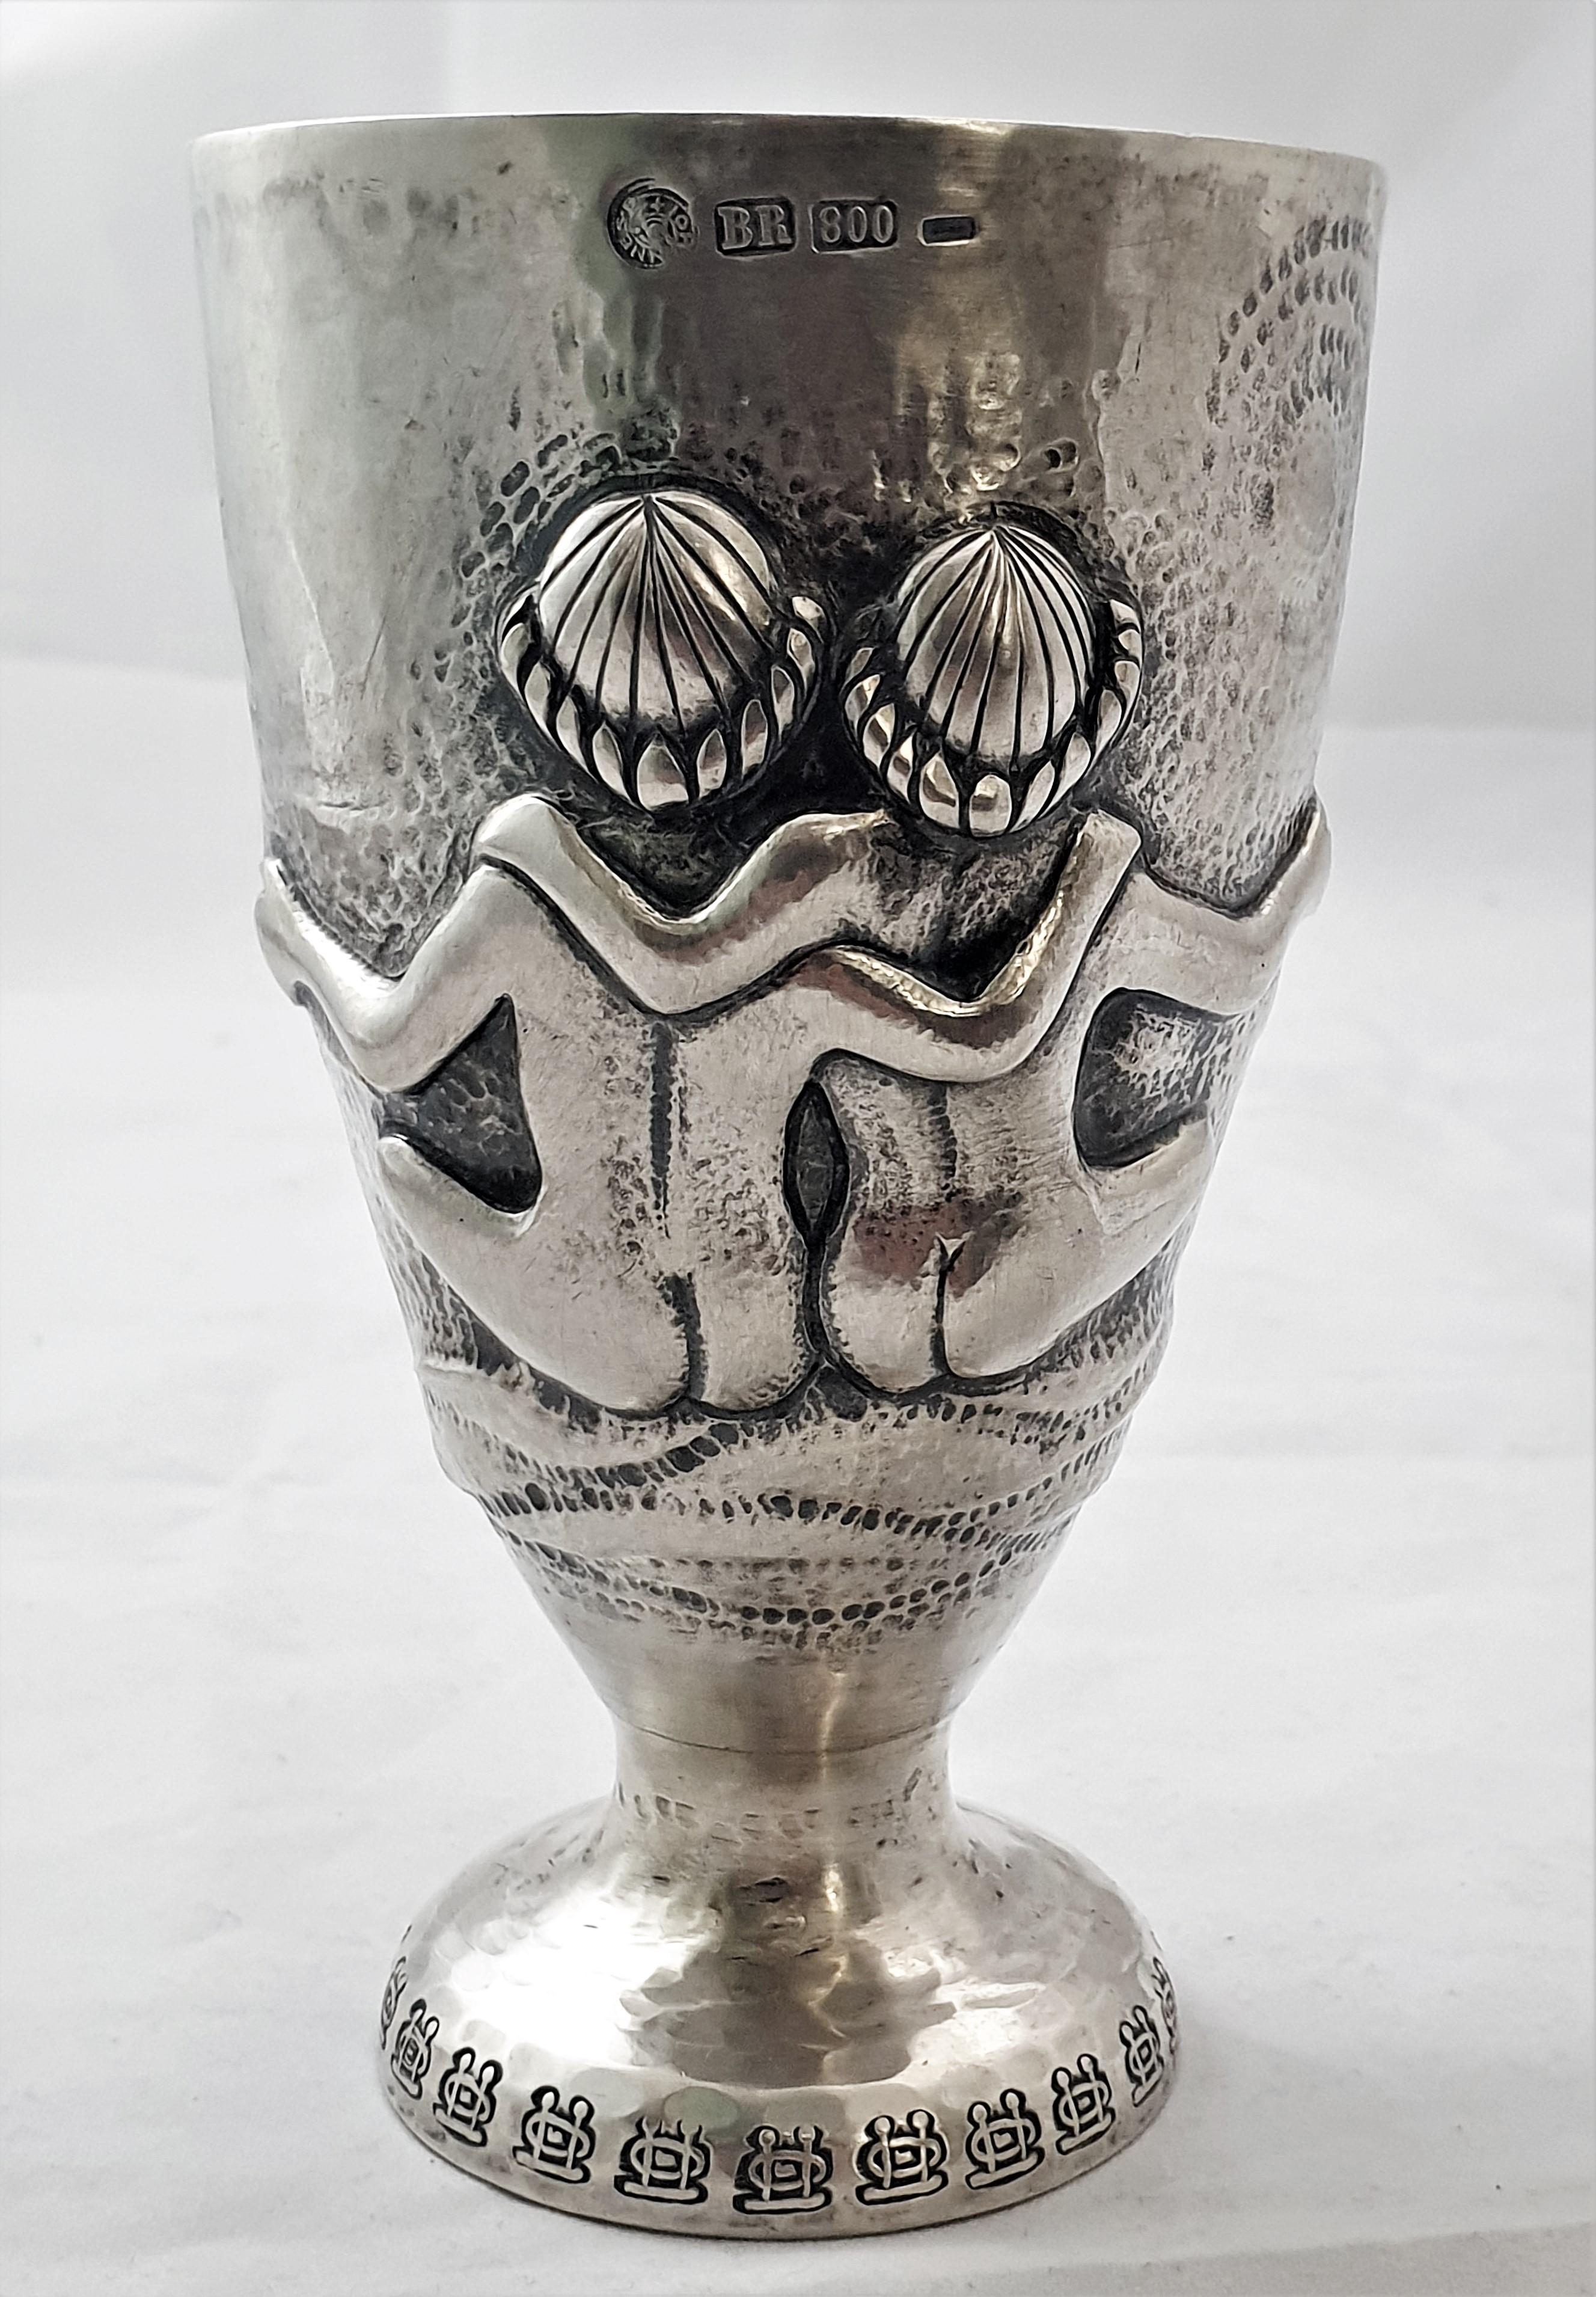 Silver Cup by Brandimarte from Florence - realized around 1970s

Chiseled and hammered by hand, excellent work and condition

Brandimarte was the most renowned silversmith in Florence of XX century

 